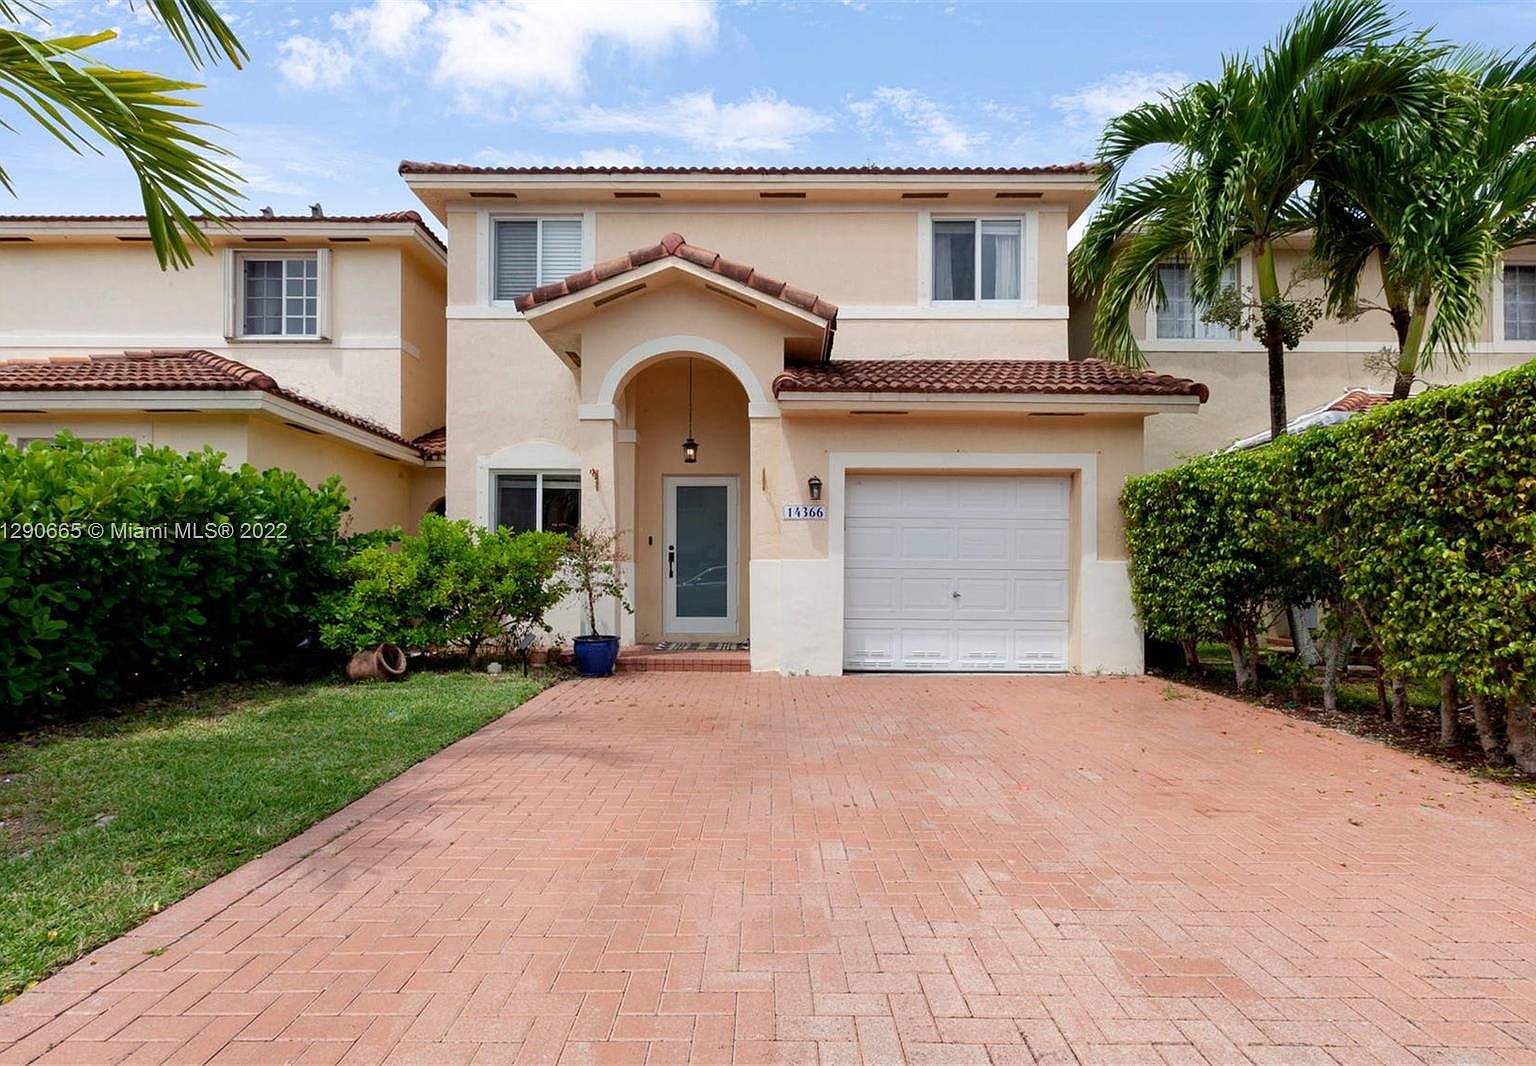 13363 SW 142nd Ter, Miami, FL 33186 | Zillow